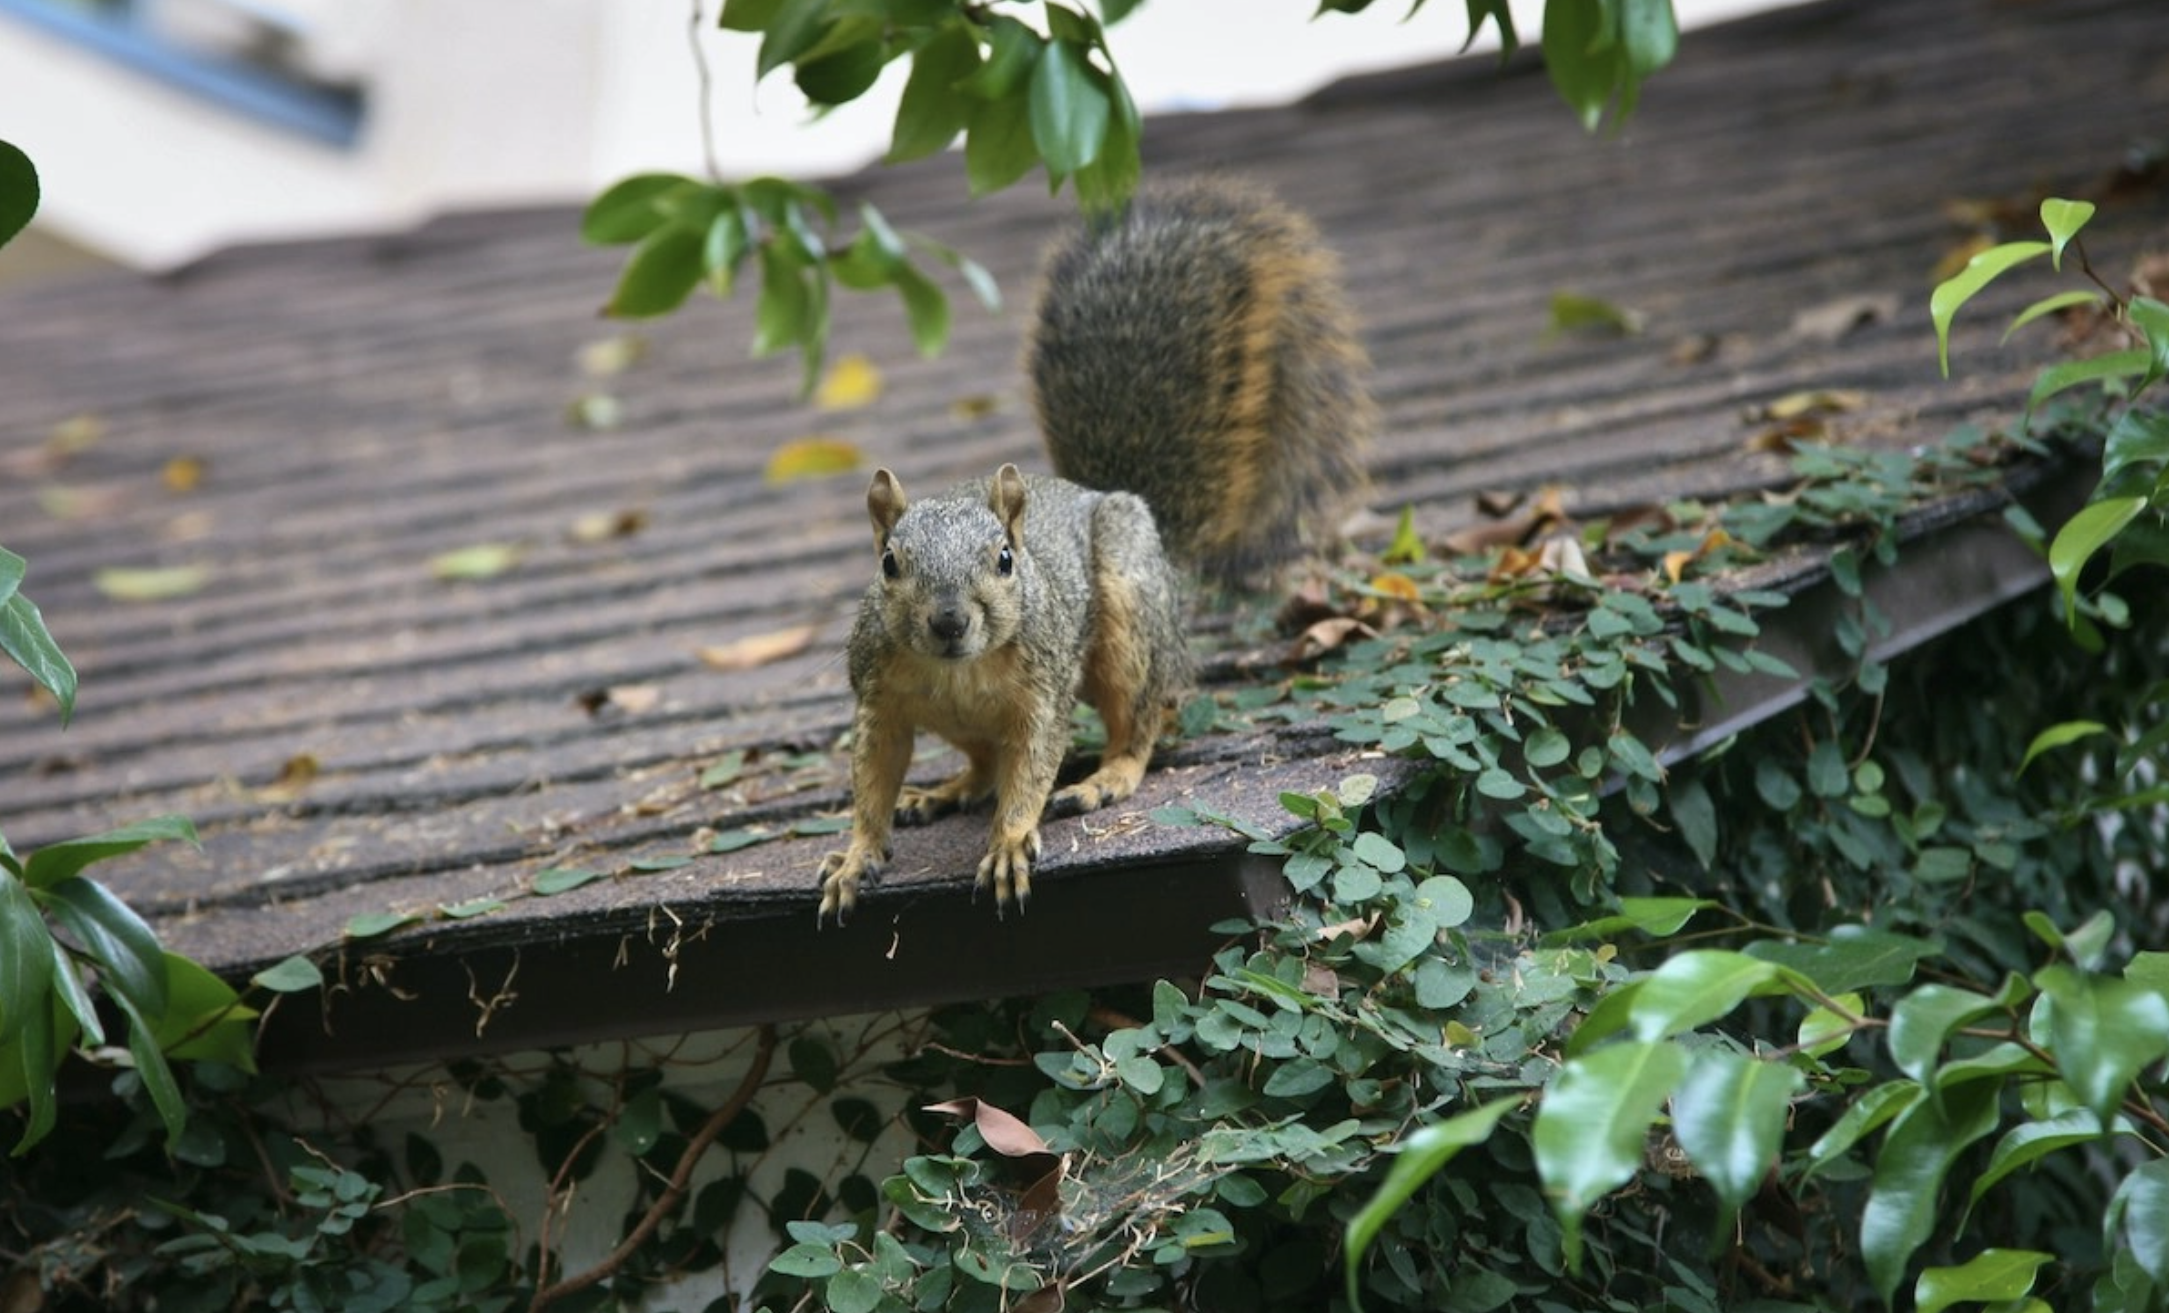 image of a squirrel on a roof causing central southwest houston roof damage